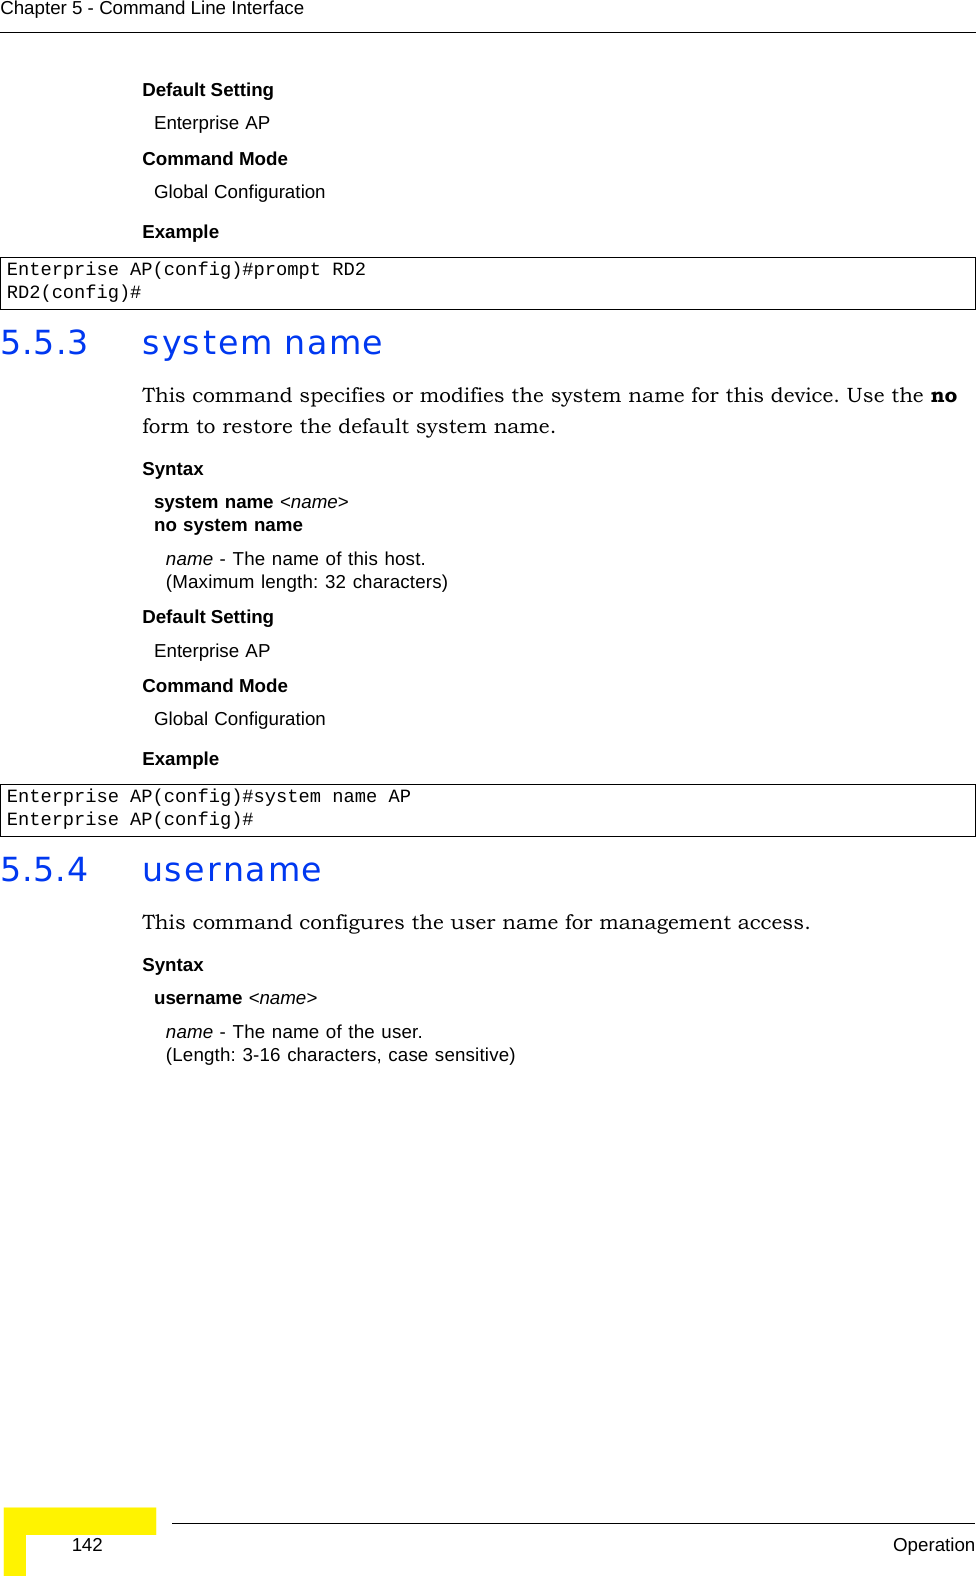  142 OperationChapter 5 - Command Line InterfaceDefault Setting Enterprise APCommand Mode Global ConfigurationExample 5.5.3 system nameThis command specifies or modifies the system name for this device. Use the no form to restore the default system name.Syntax system name &lt;name&gt;no system namename - The name of this host. (Maximum length: 32 characters)Default Setting Enterprise APCommand Mode Global ConfigurationExample 5.5.4 usernameThis command configures the user name for management access.Syntax username &lt;name&gt;name - The name of the user. (Length: 3-16 characters, case sensitive)Enterprise AP(config)#prompt RD2RD2(config)#Enterprise AP(config)#system name APEnterprise AP(config)#